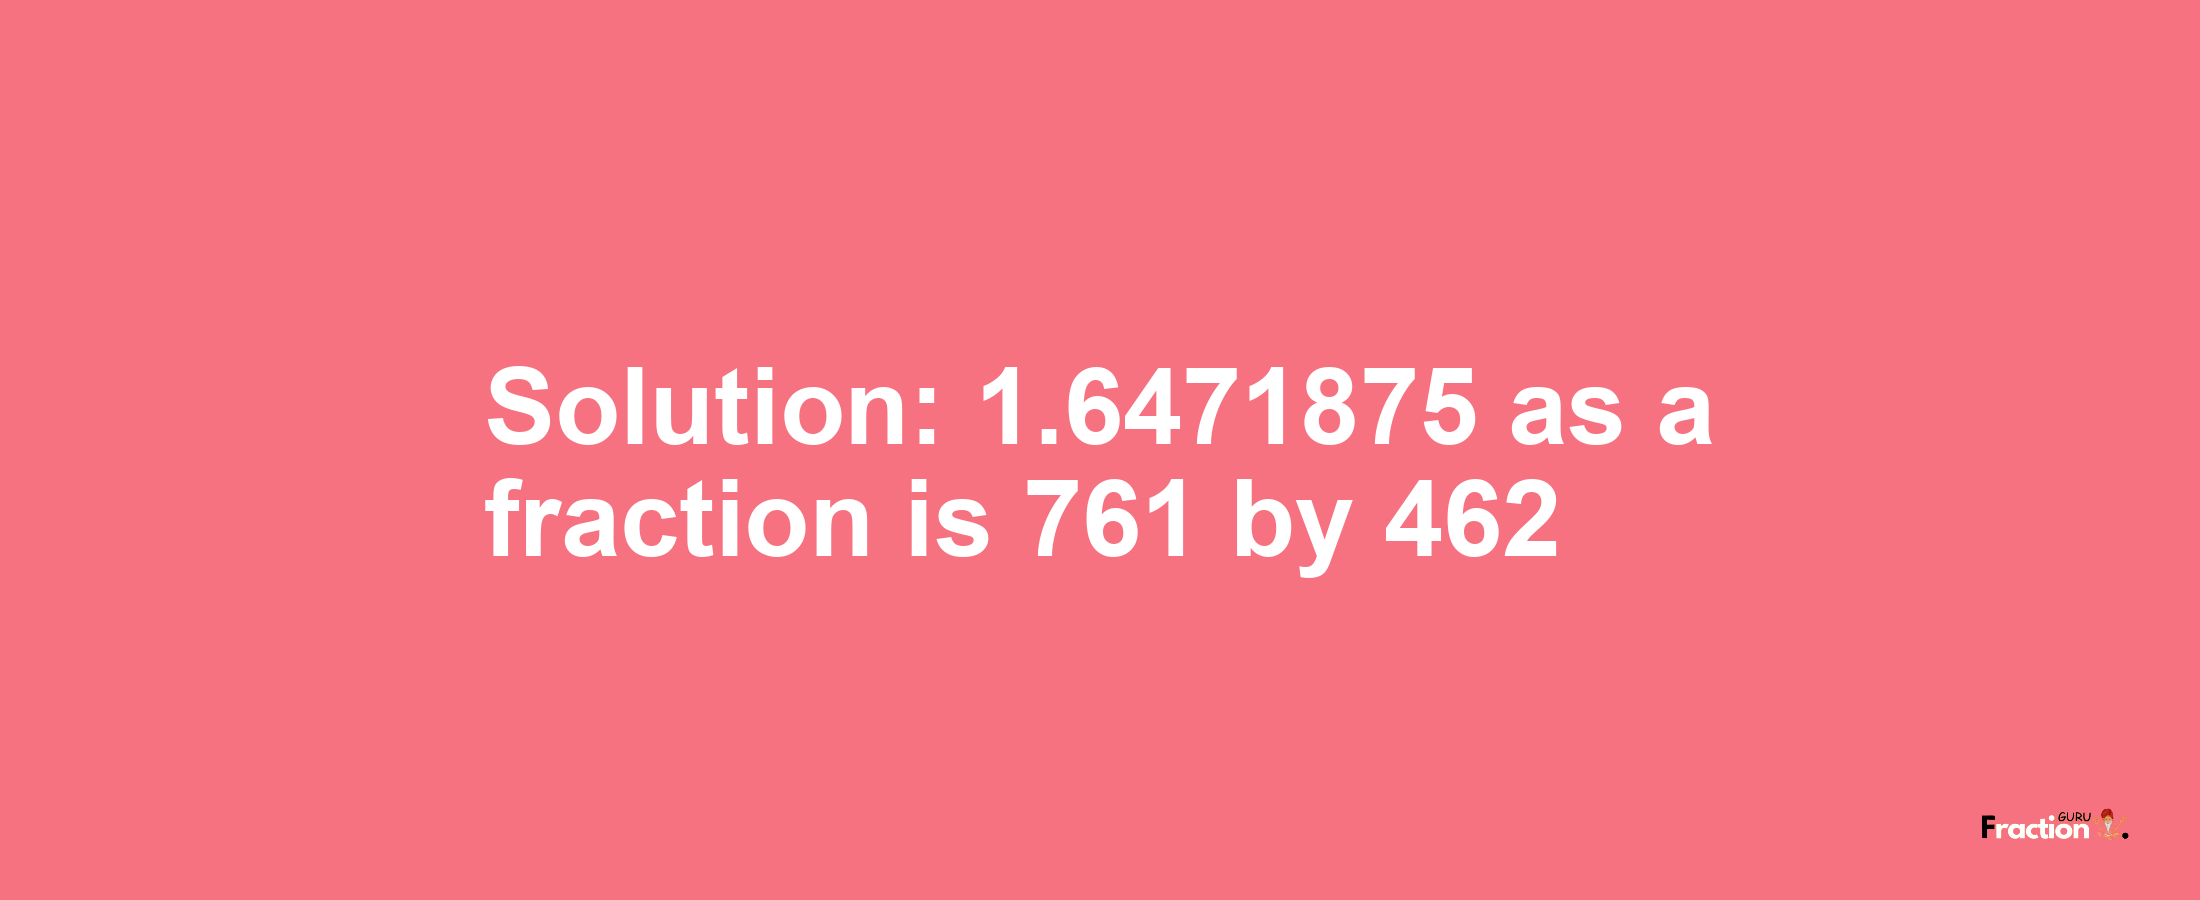 Solution:1.6471875 as a fraction is 761/462